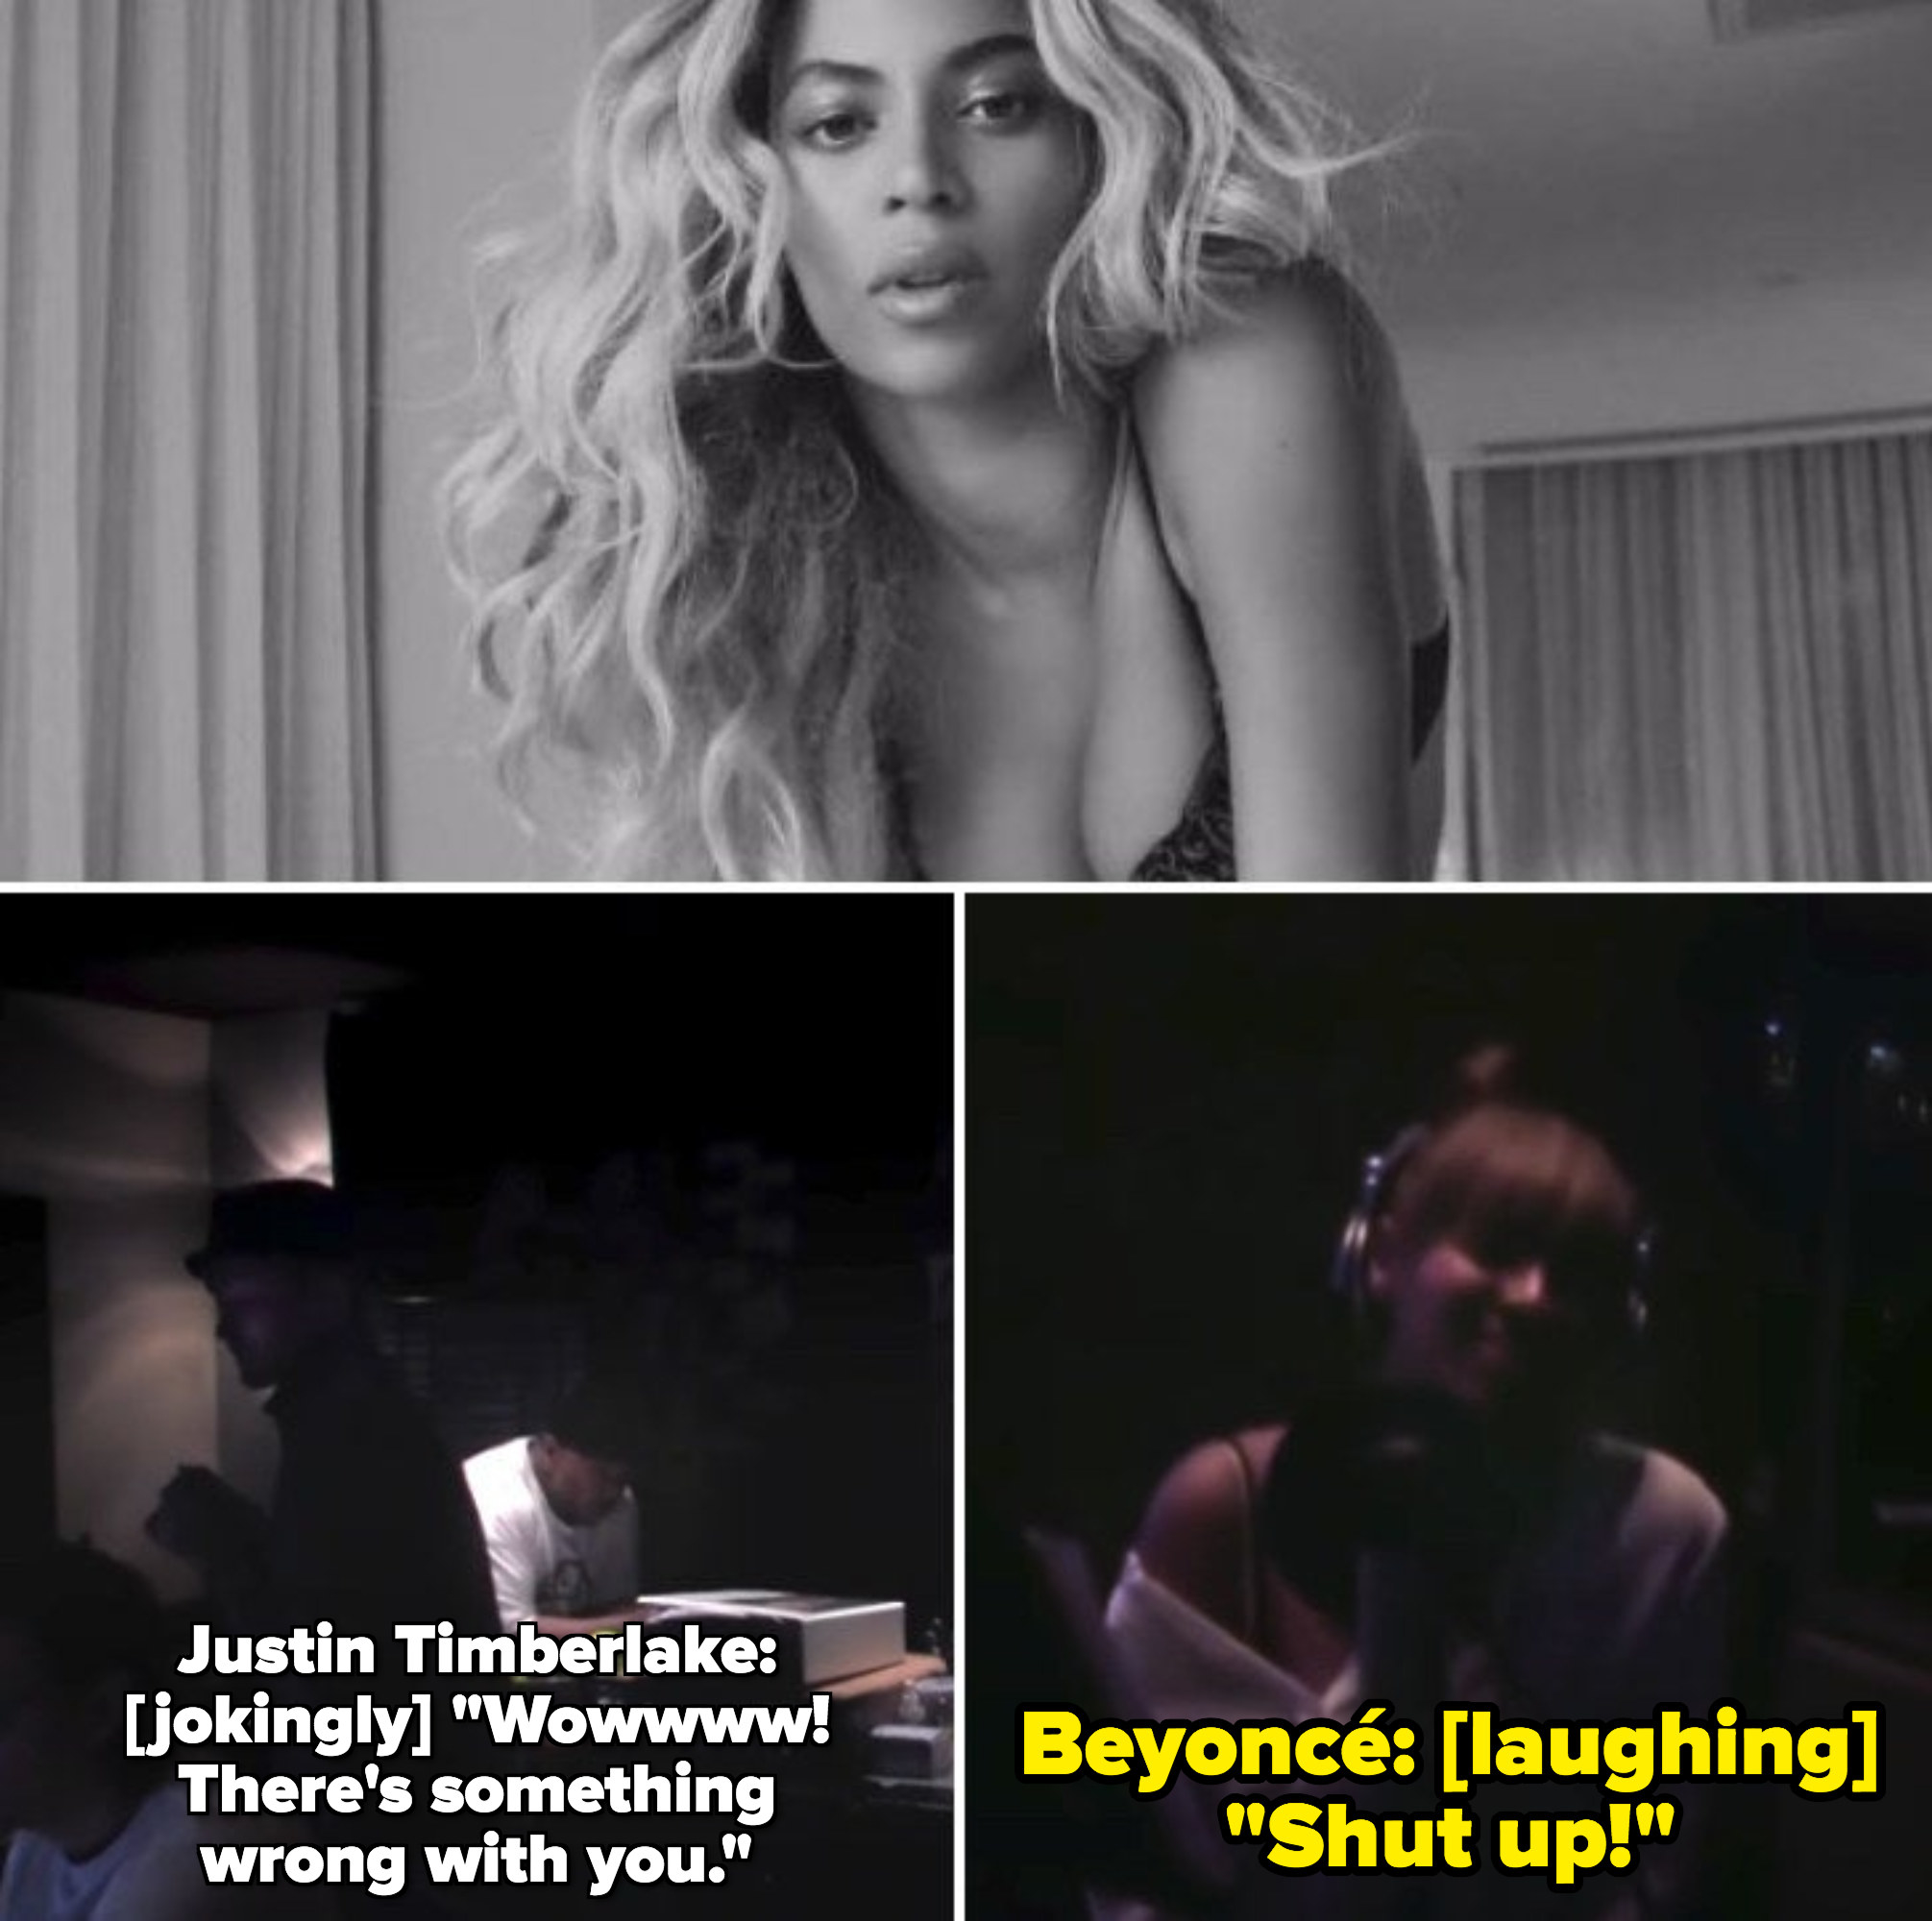 Beyoncé singing in &quot;Rocket&quot; music video; Justin Timberlake in the recording studio, jokingly telling Beyoncé: &quot;Wow! There&#x27;s something wrong with you&quot; and she responds laughing: &quot;Shut up!&quot;